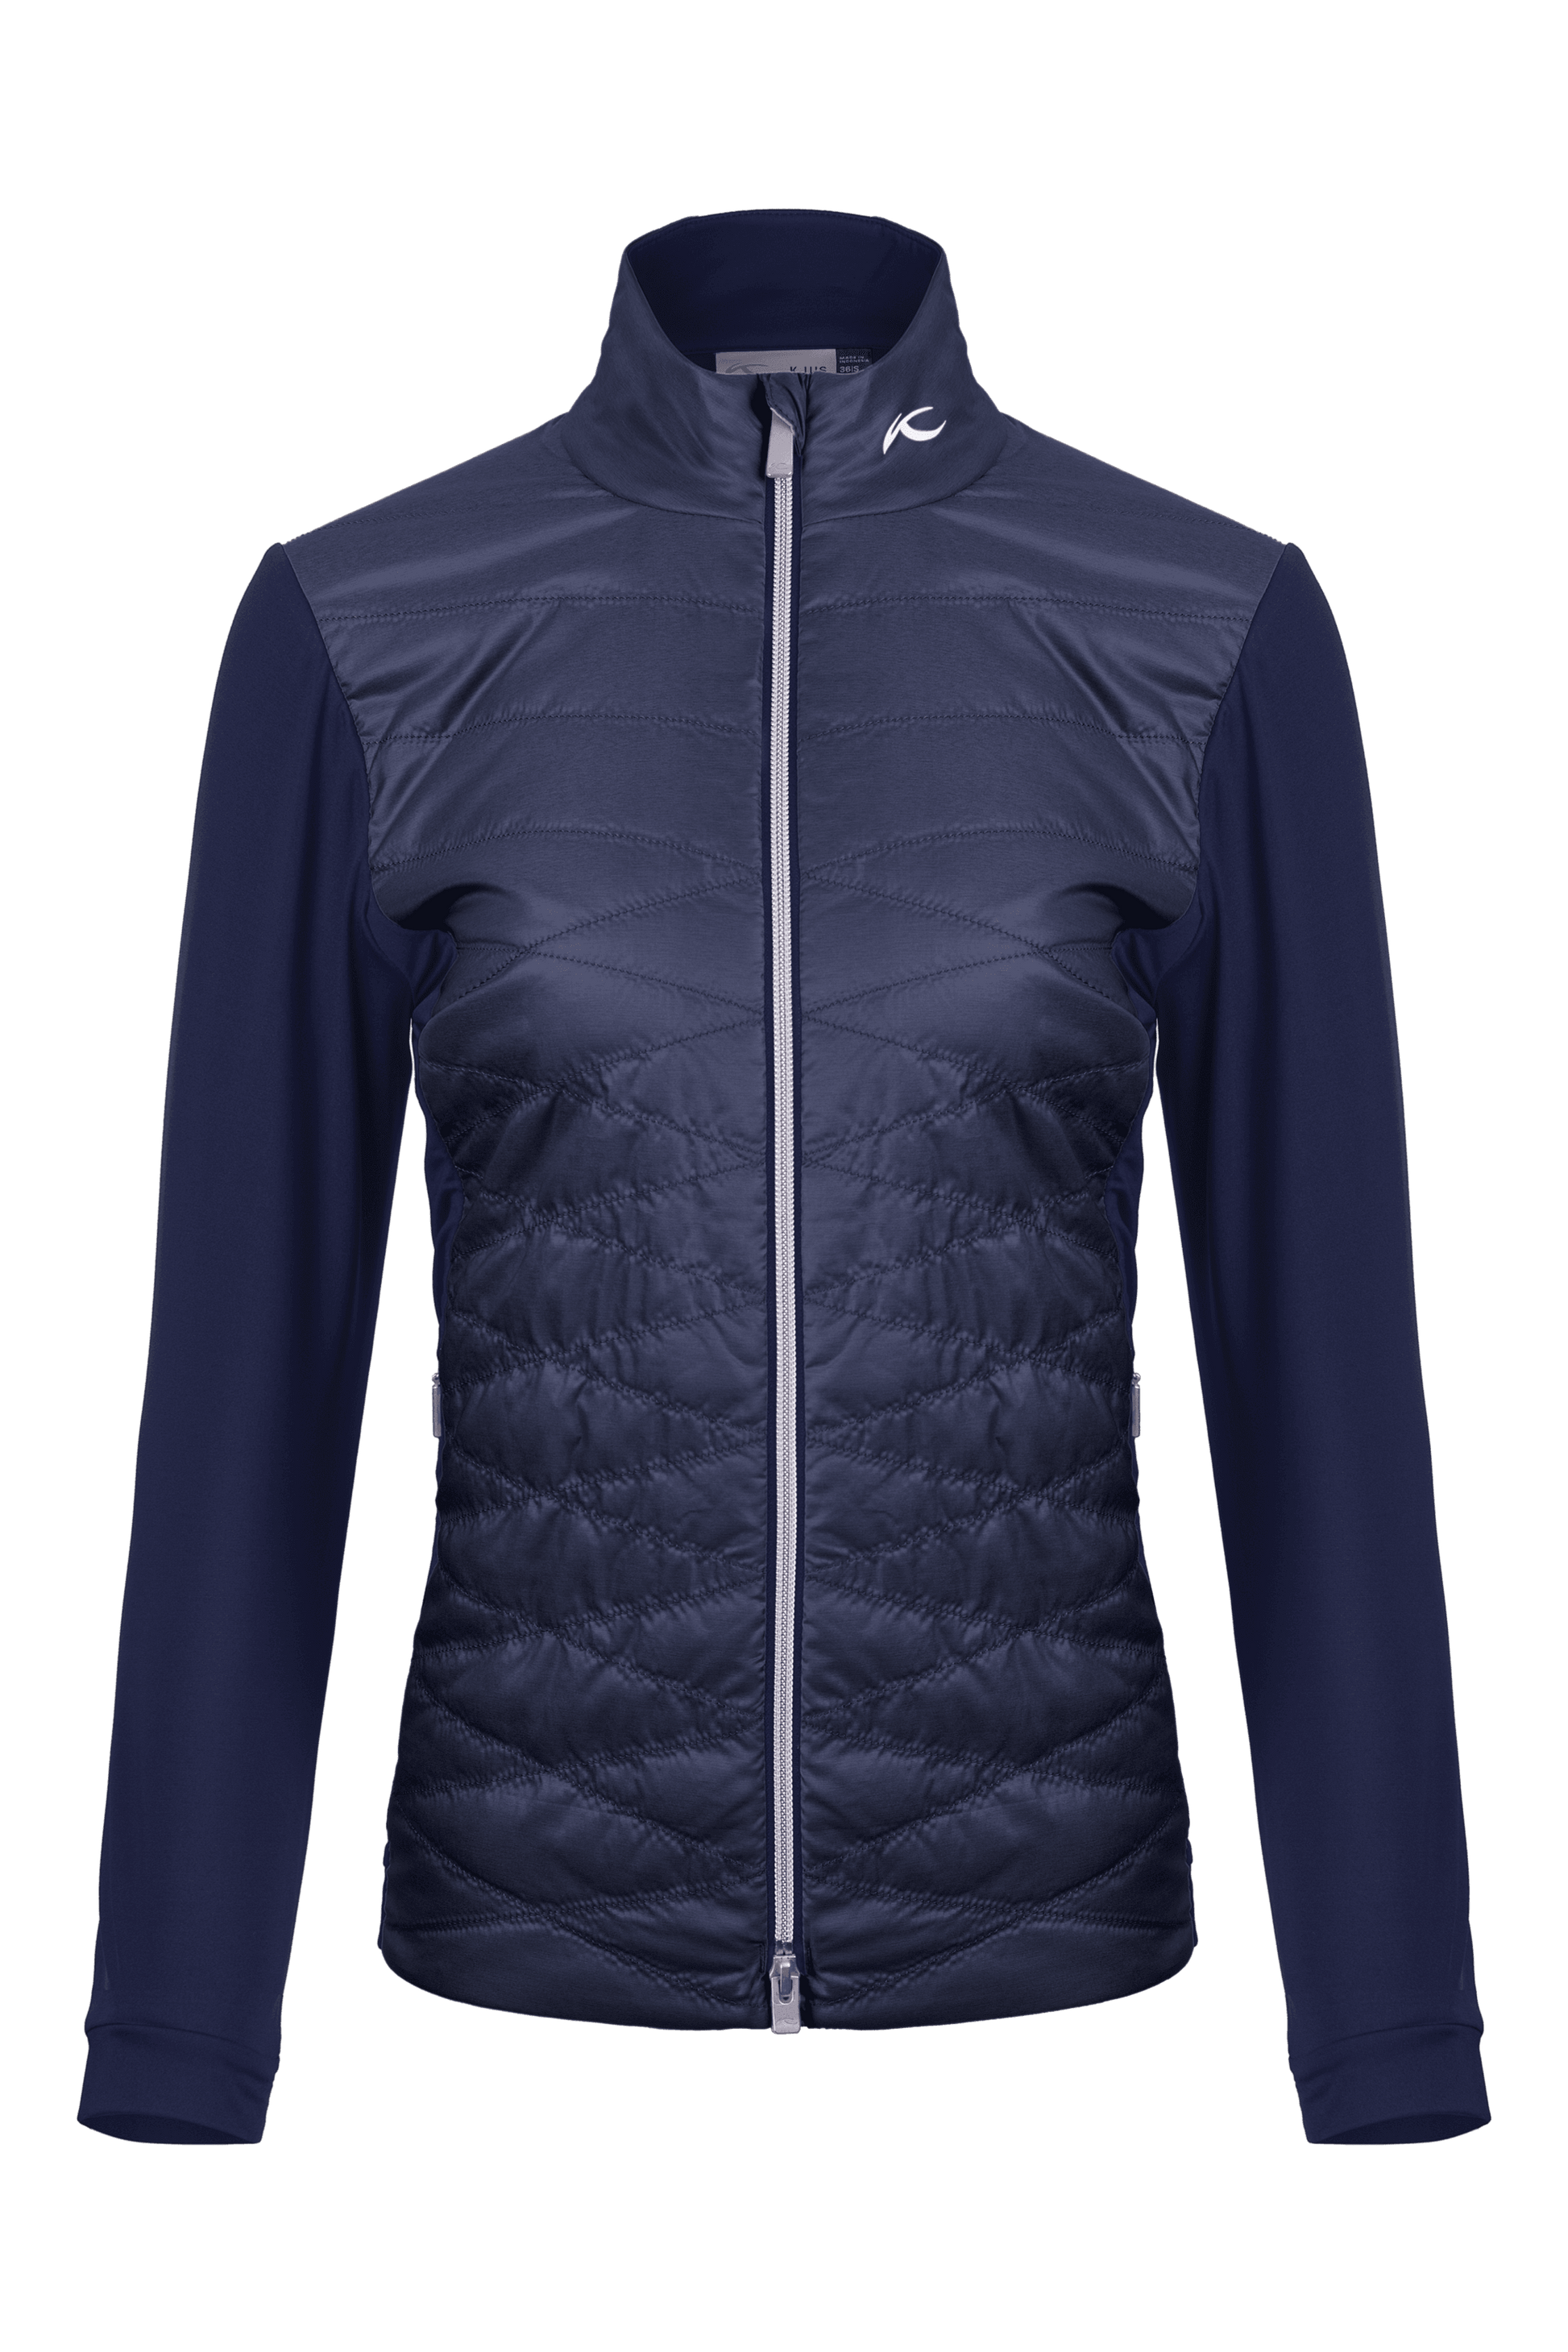 Women Retention Jacket by Kjus - The Luxury Promotional Gifts Company Limited